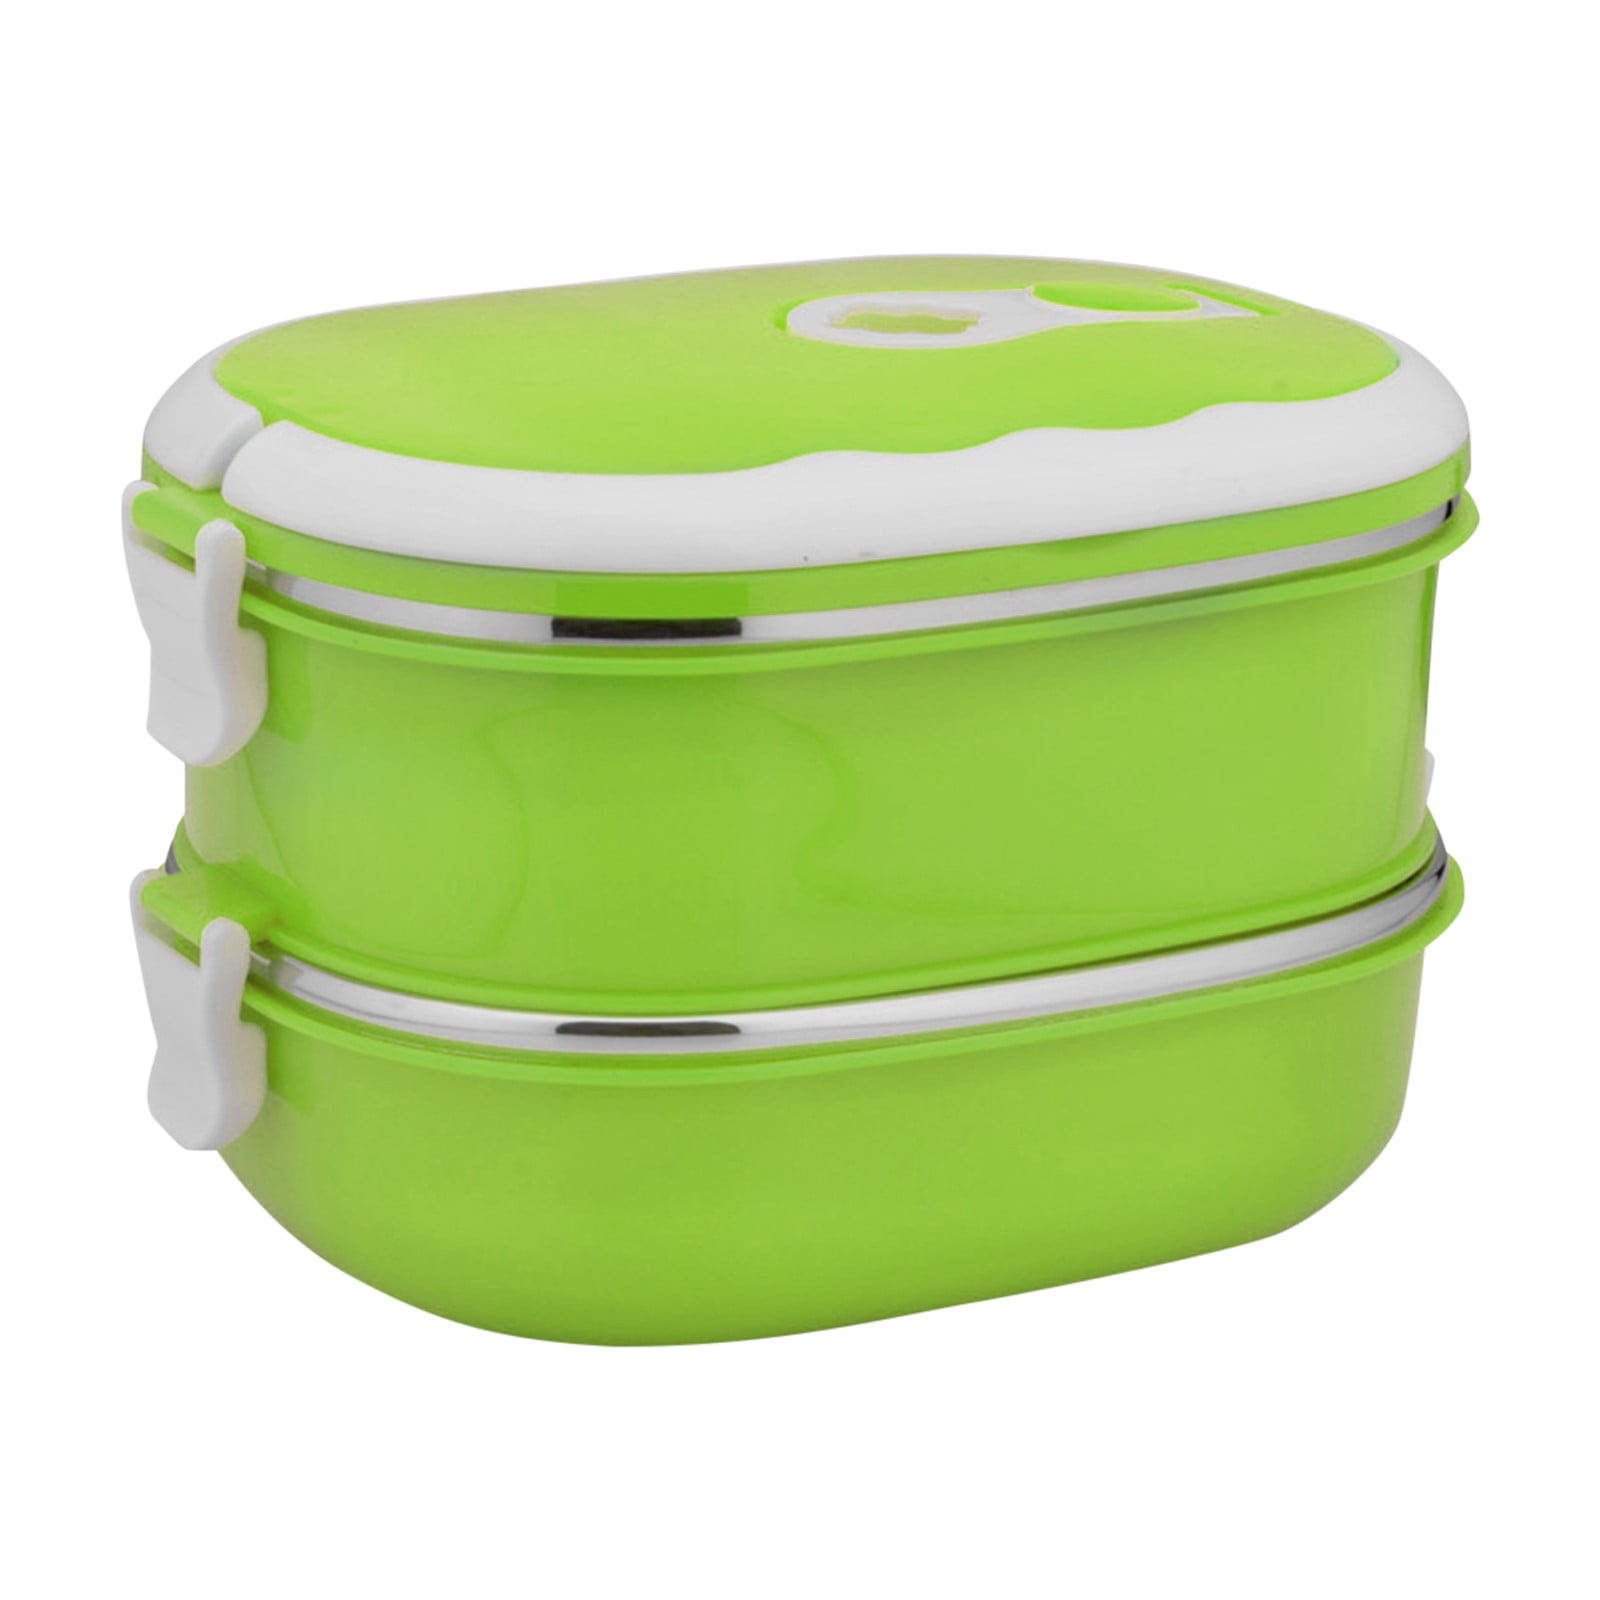 Small Glass Food Storage Hot Food Container Rectangular Insulation Box Stainless Steel Lunch Box Food Storage Container Children's Hot Food Insulation